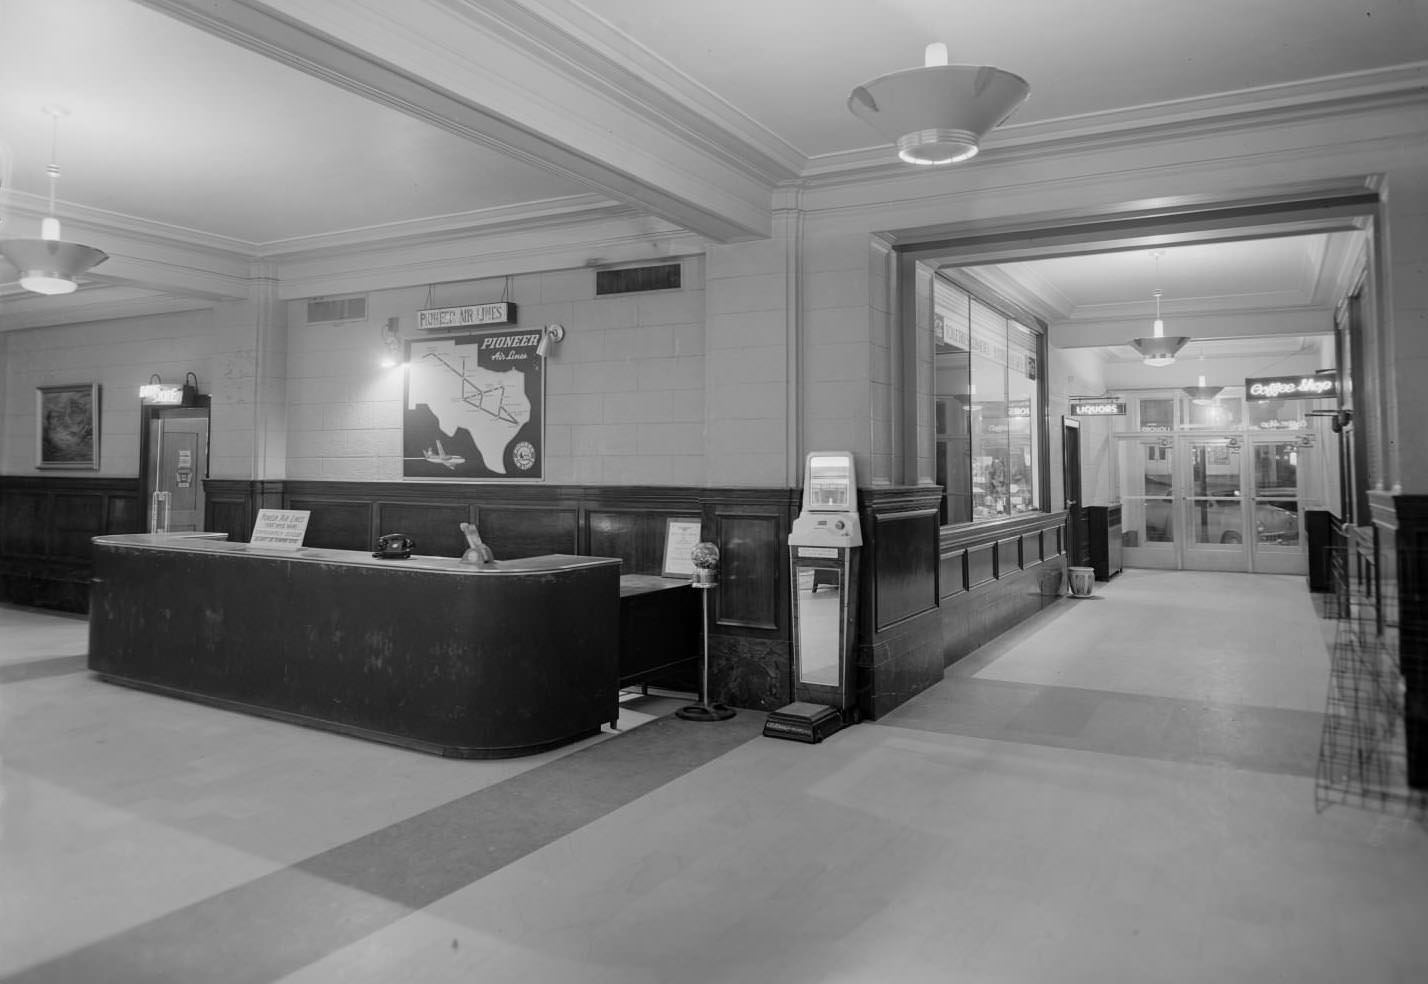 Austin Hotel Entrance and Reception Area, 1954